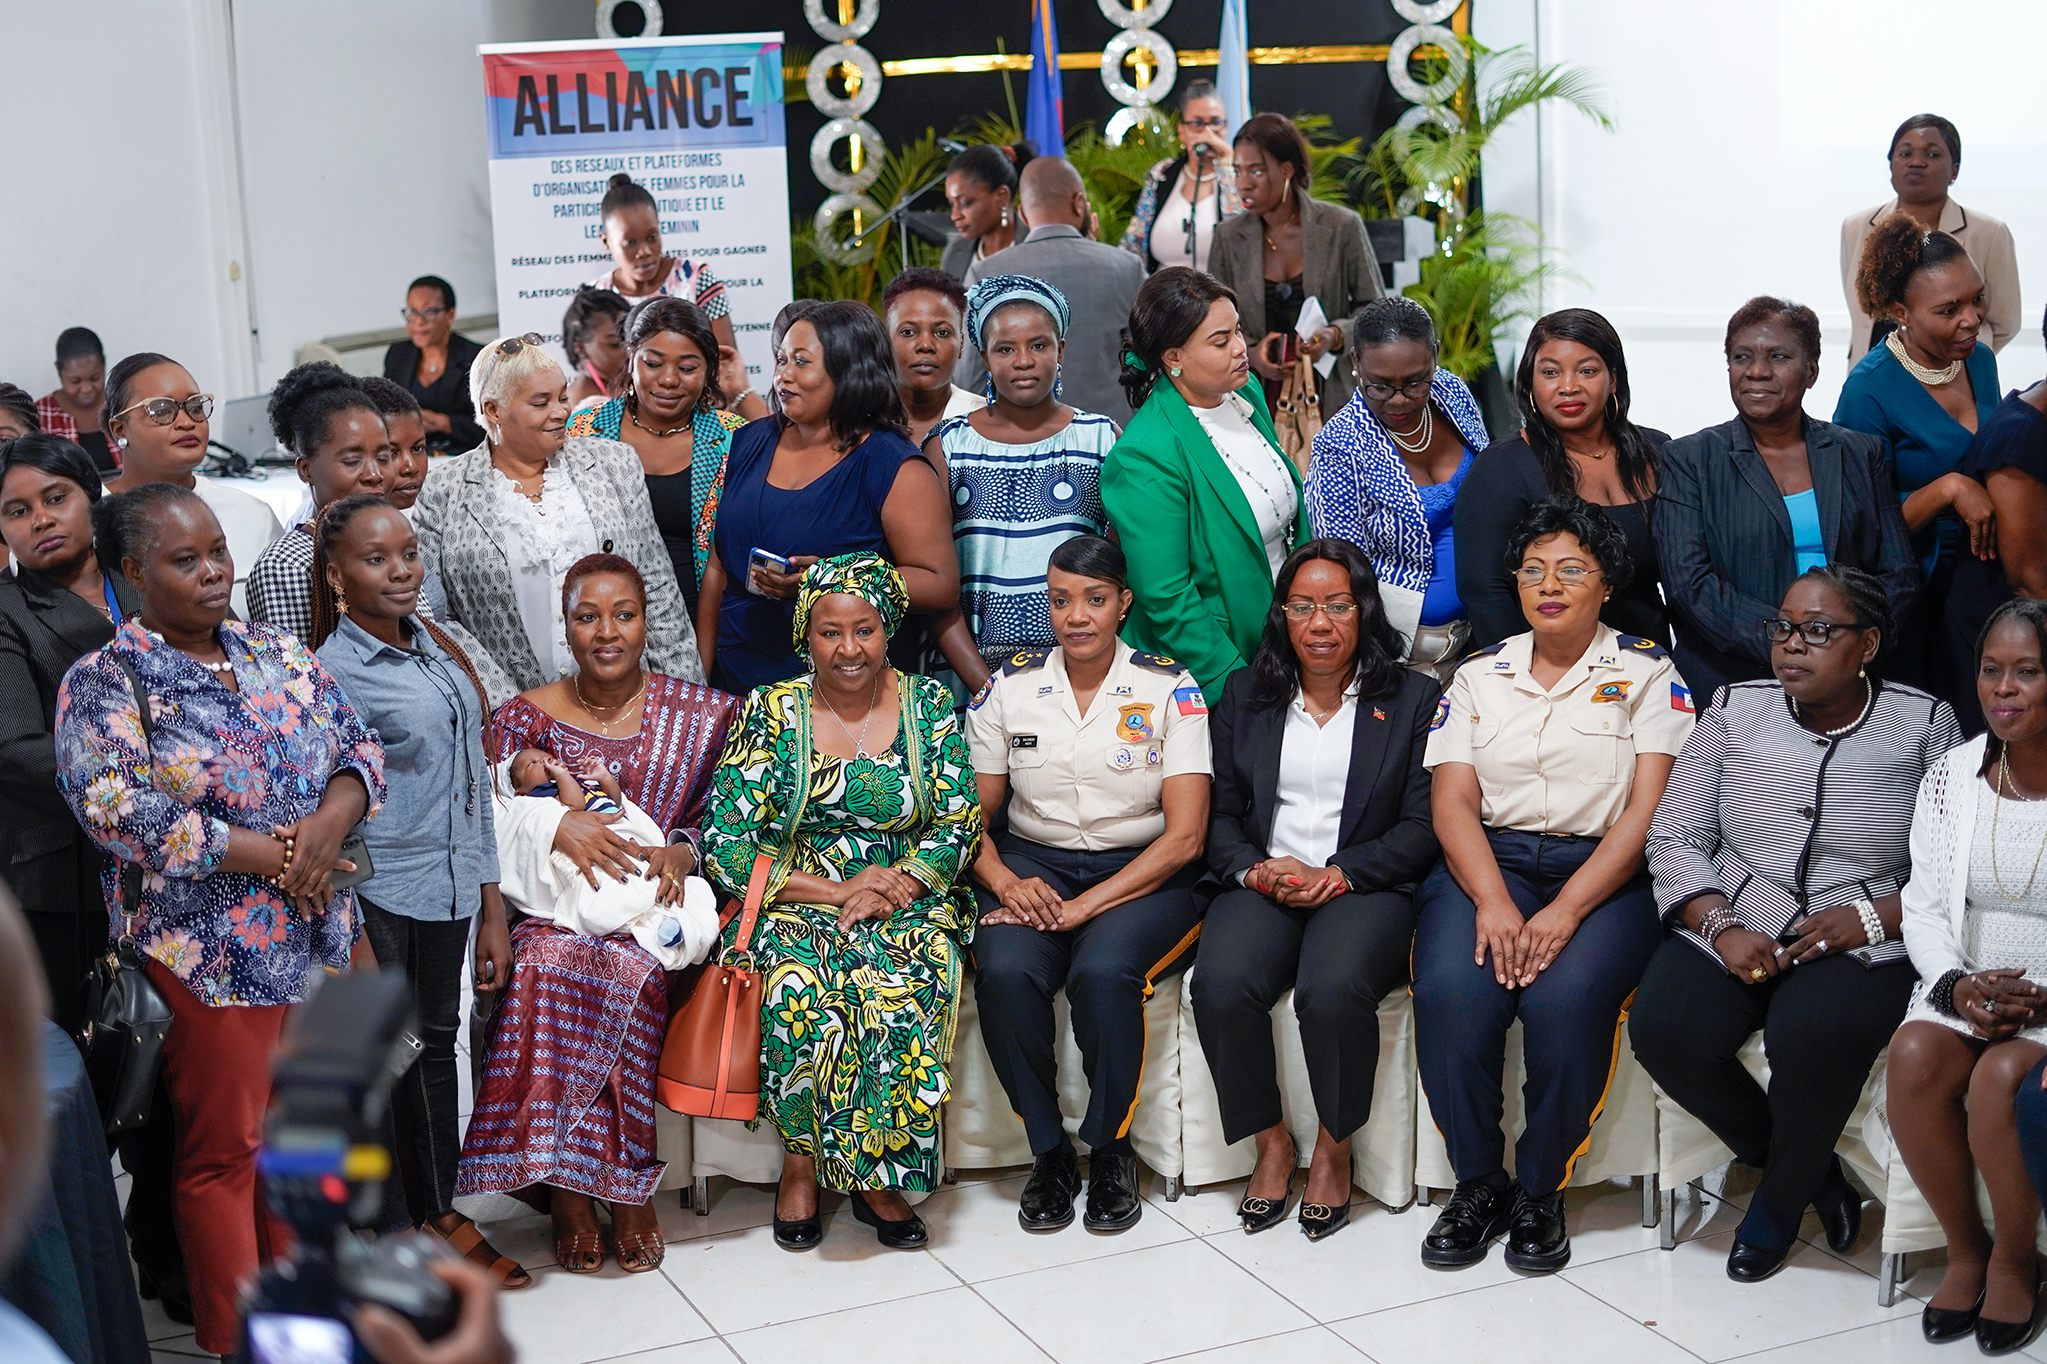 our story Official launch of the Alliance of Platforms and Networks of Women's Organizations for the Promotion of Political Participation and Female Leadership. image